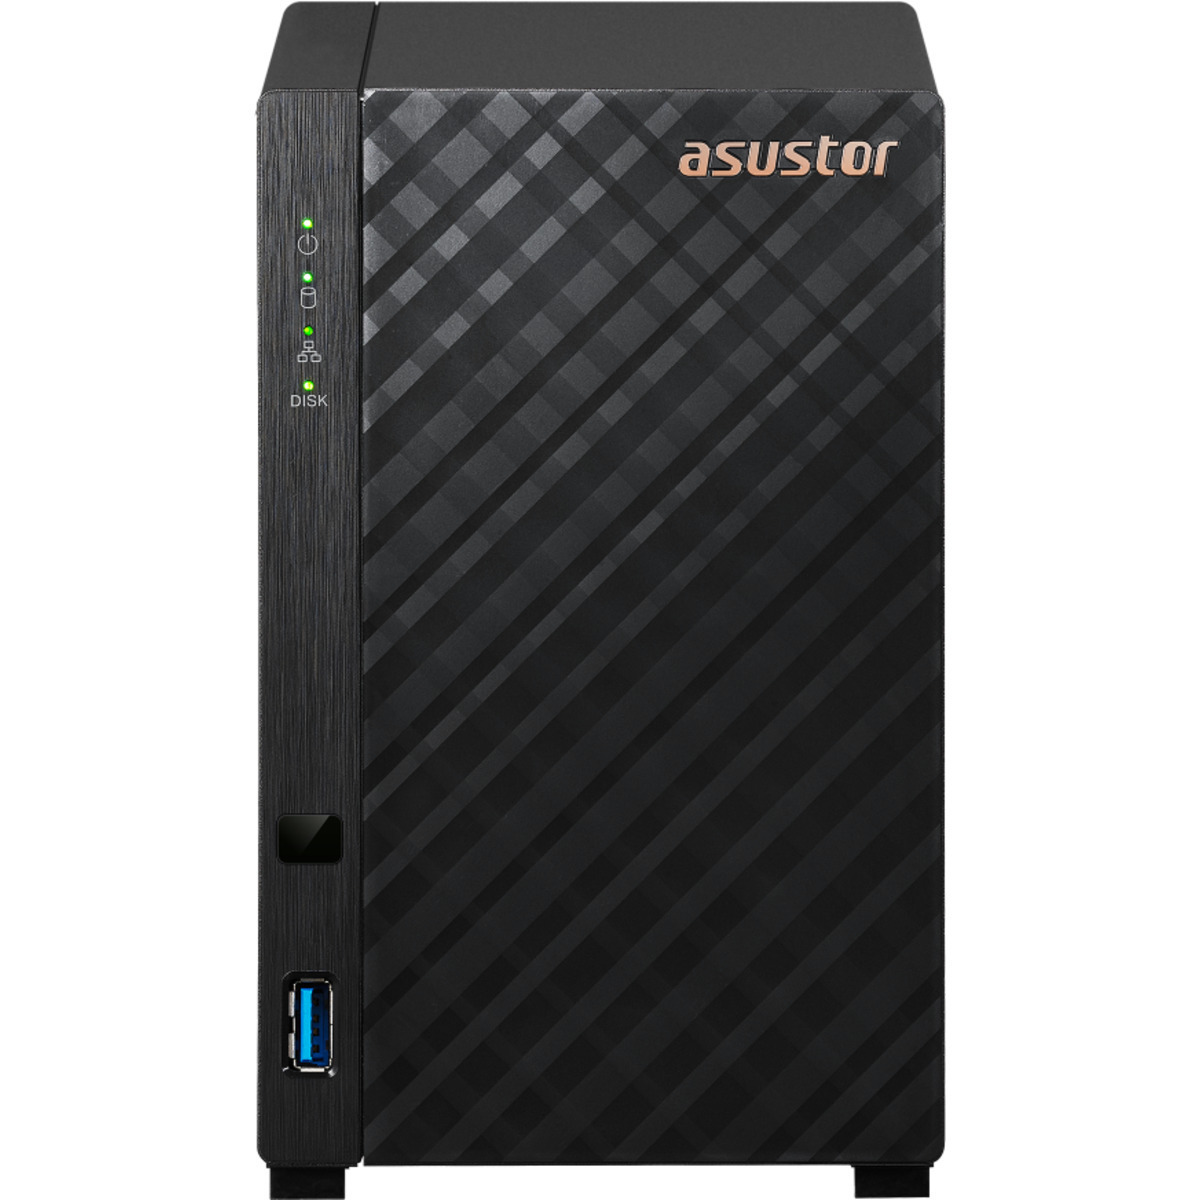 buy $918 ASUSTOR DRIVESTOR 2 AS1102T 28tb Desktop NAS - Network Attached Storage Device 2x14000gb Seagate IronWolf Pro ST14000NT001 3.5 7200rpm SATA 6Gb/s HDD NAS Class Drives Installed - Burn-In Tested - nas headquarters buy network attached storage server device das new raid-5 free shipping usa DRIVESTOR 2 AS1102T